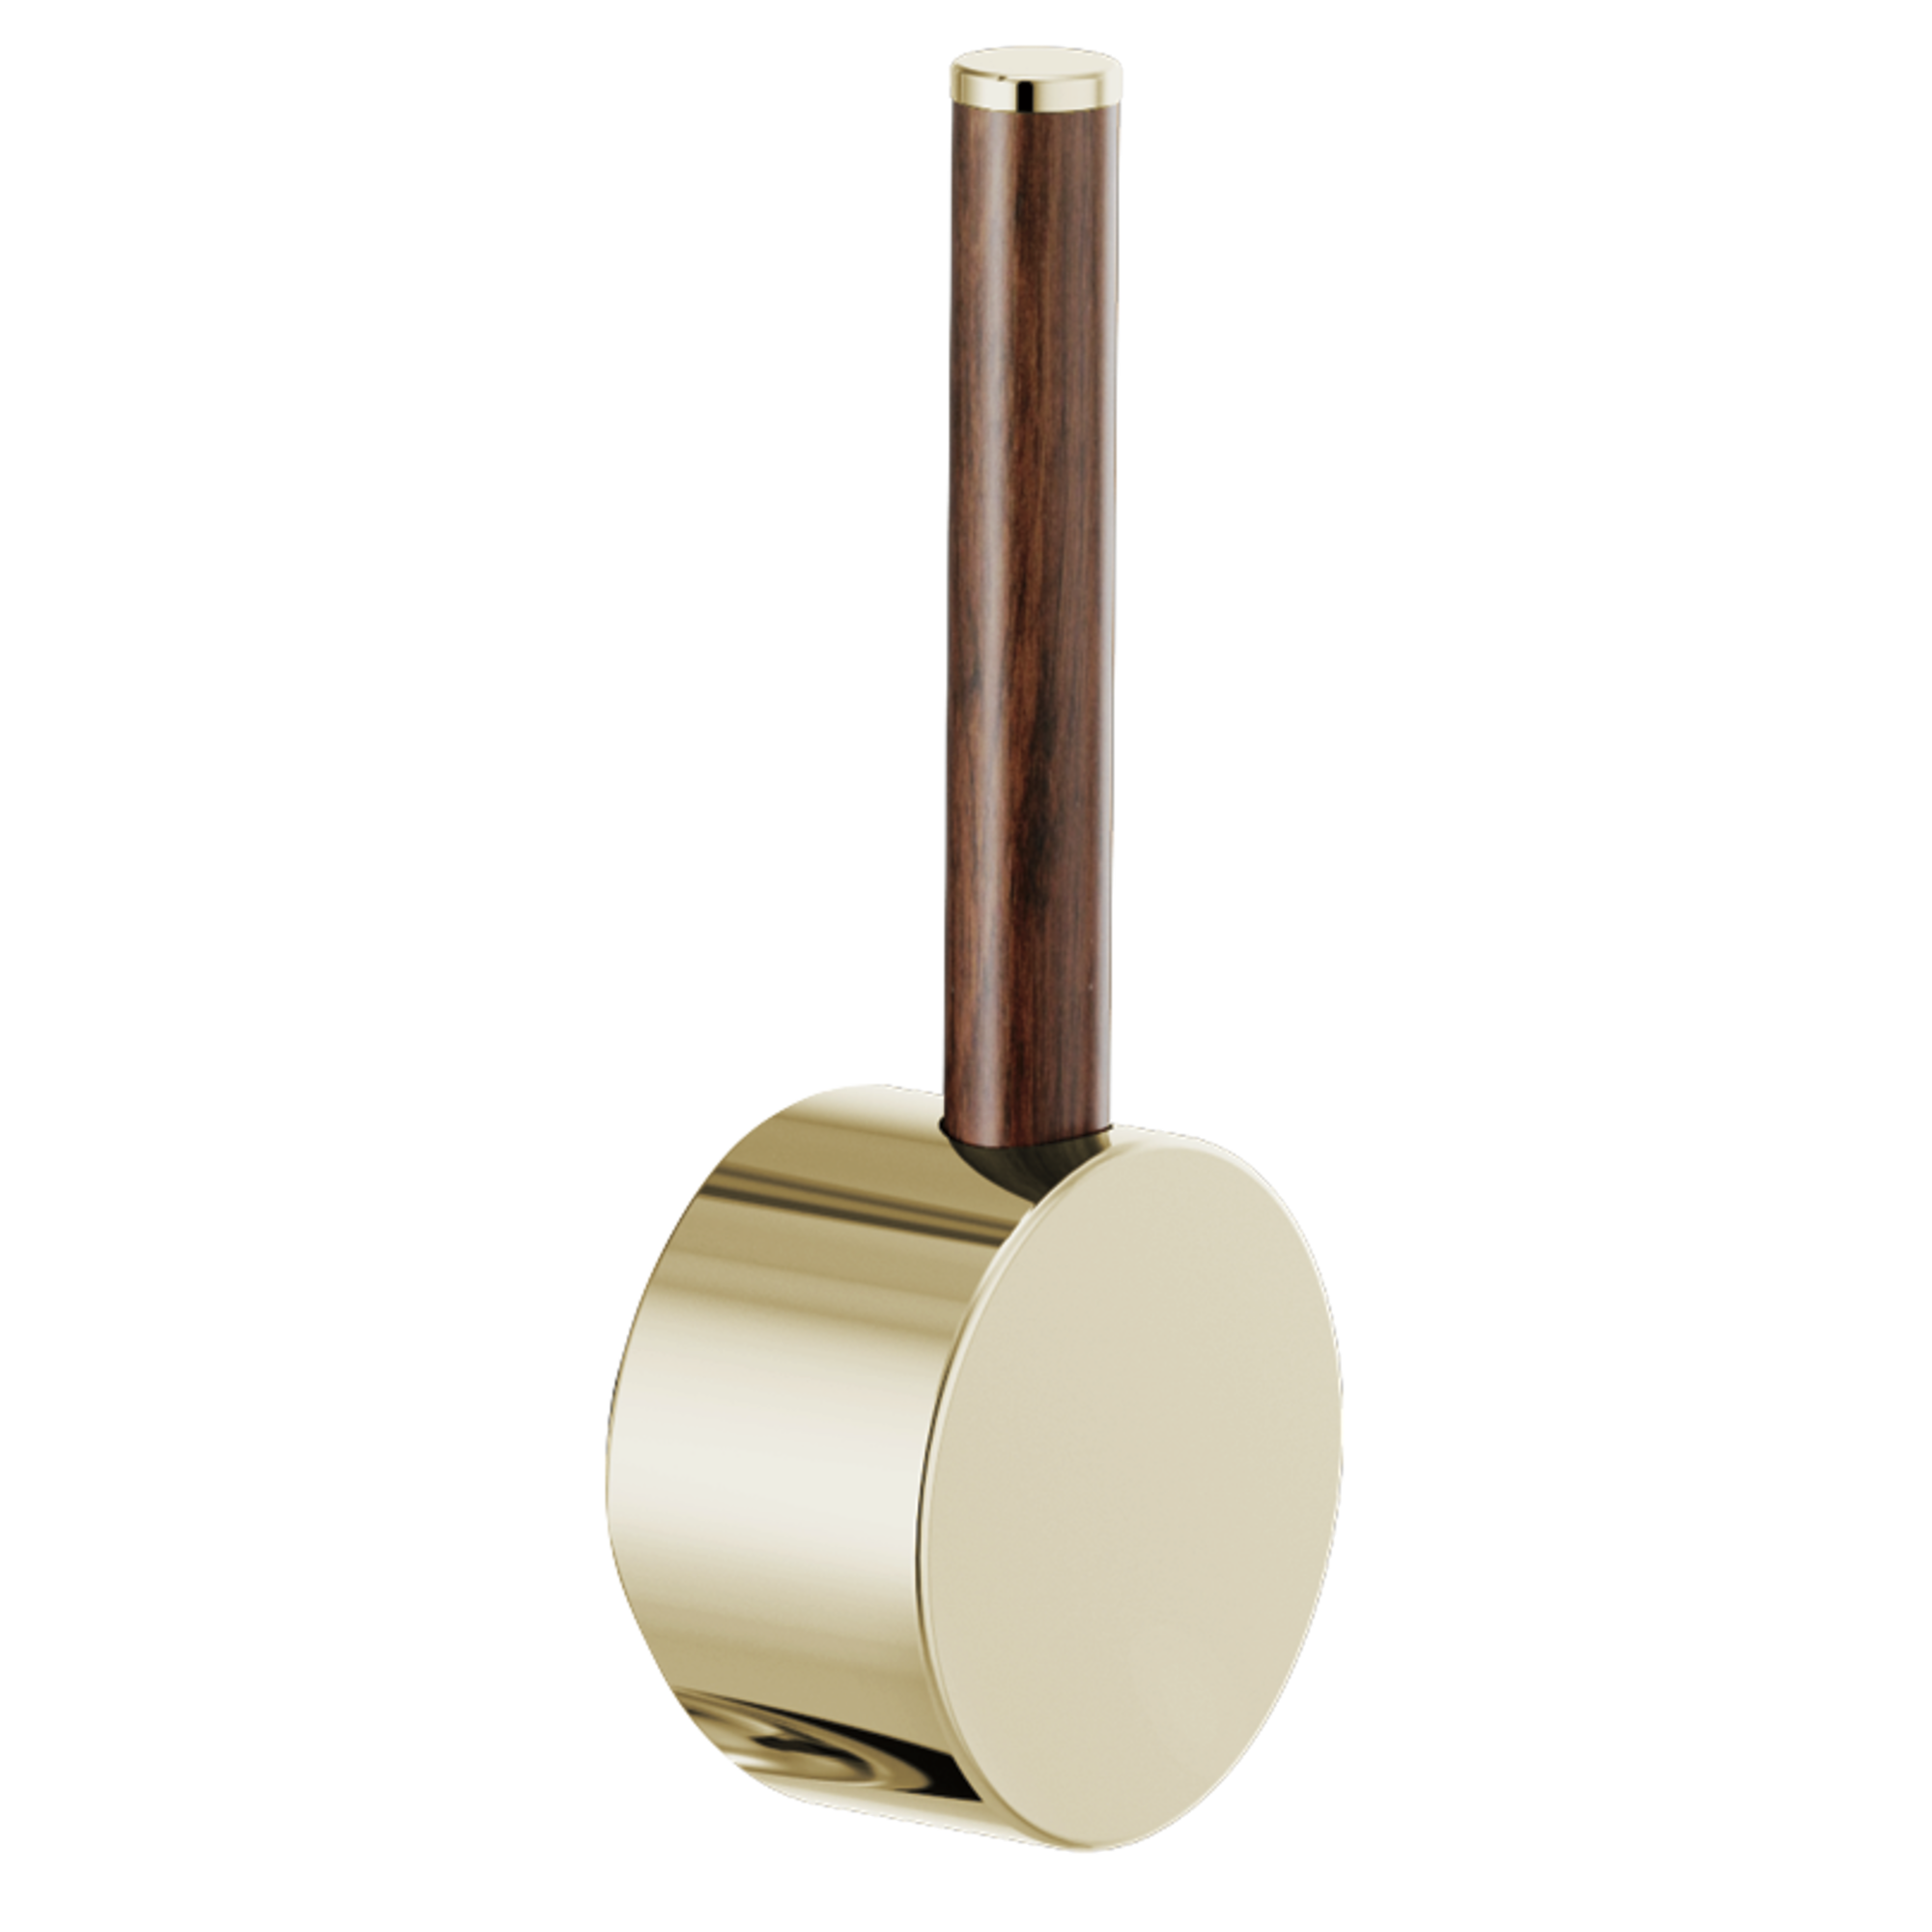 Brizo Odin Pull-Down Faucet Wood Lever Handle Kit